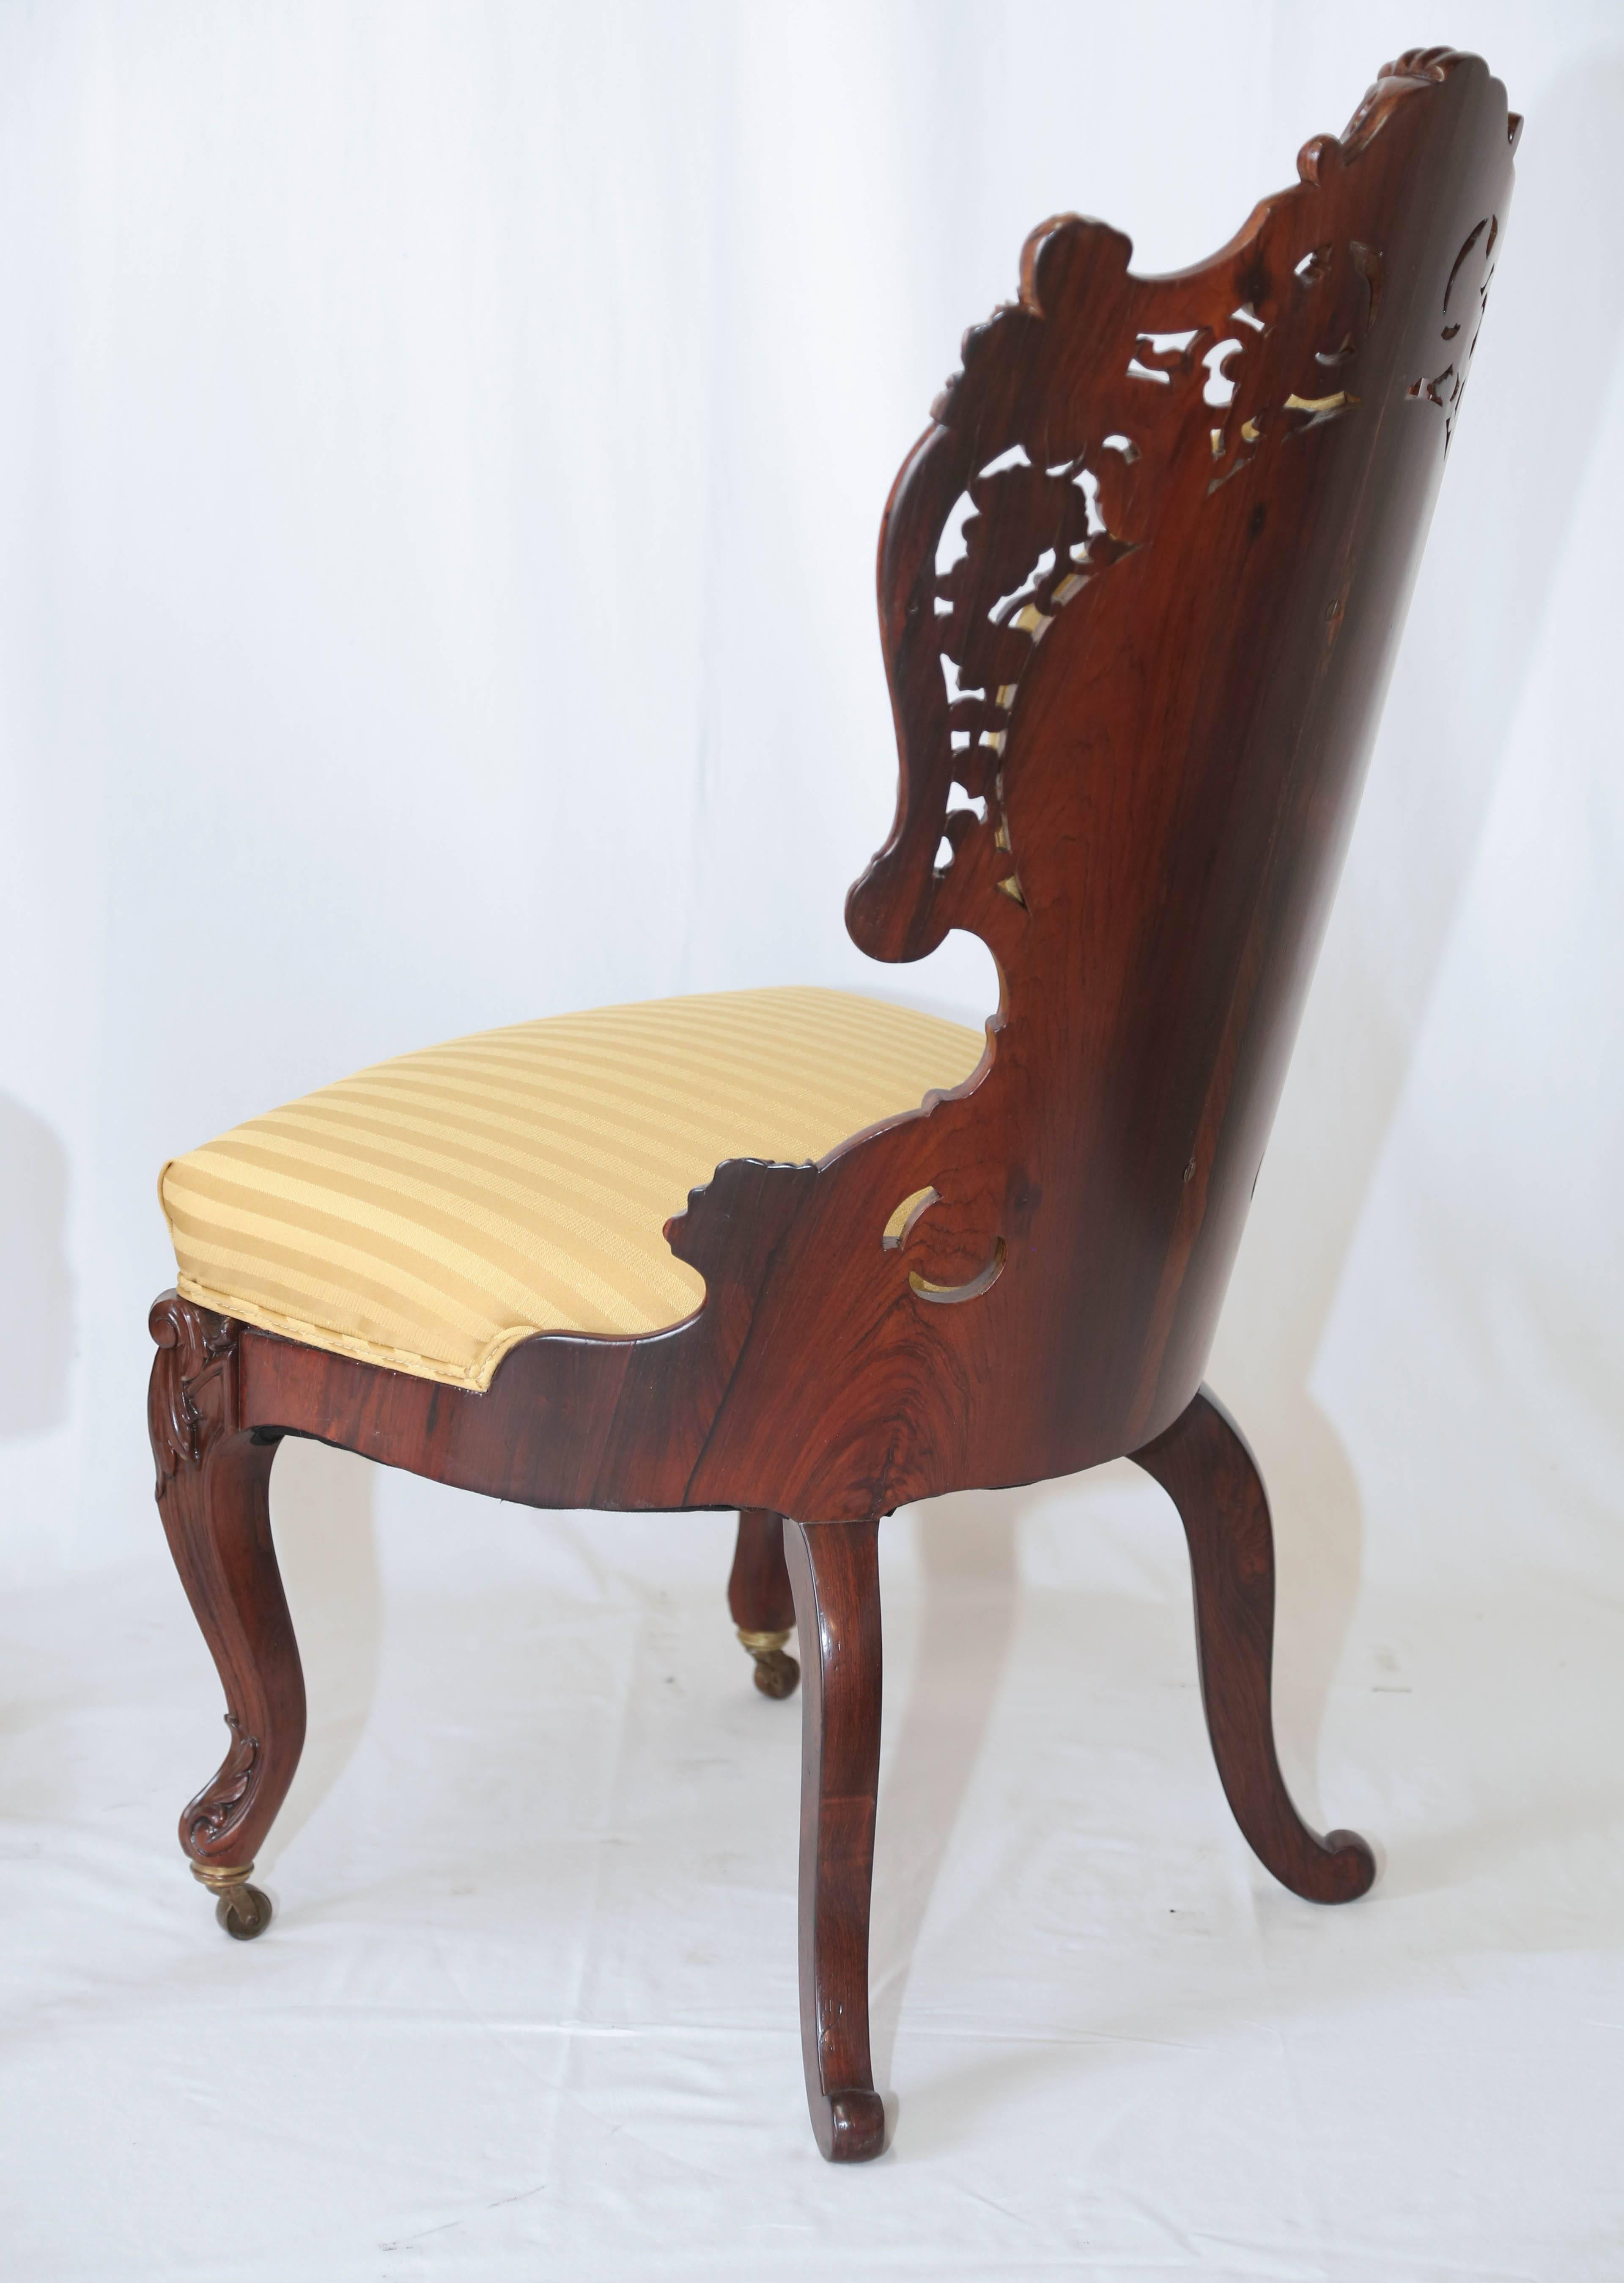 19th century chairs styles